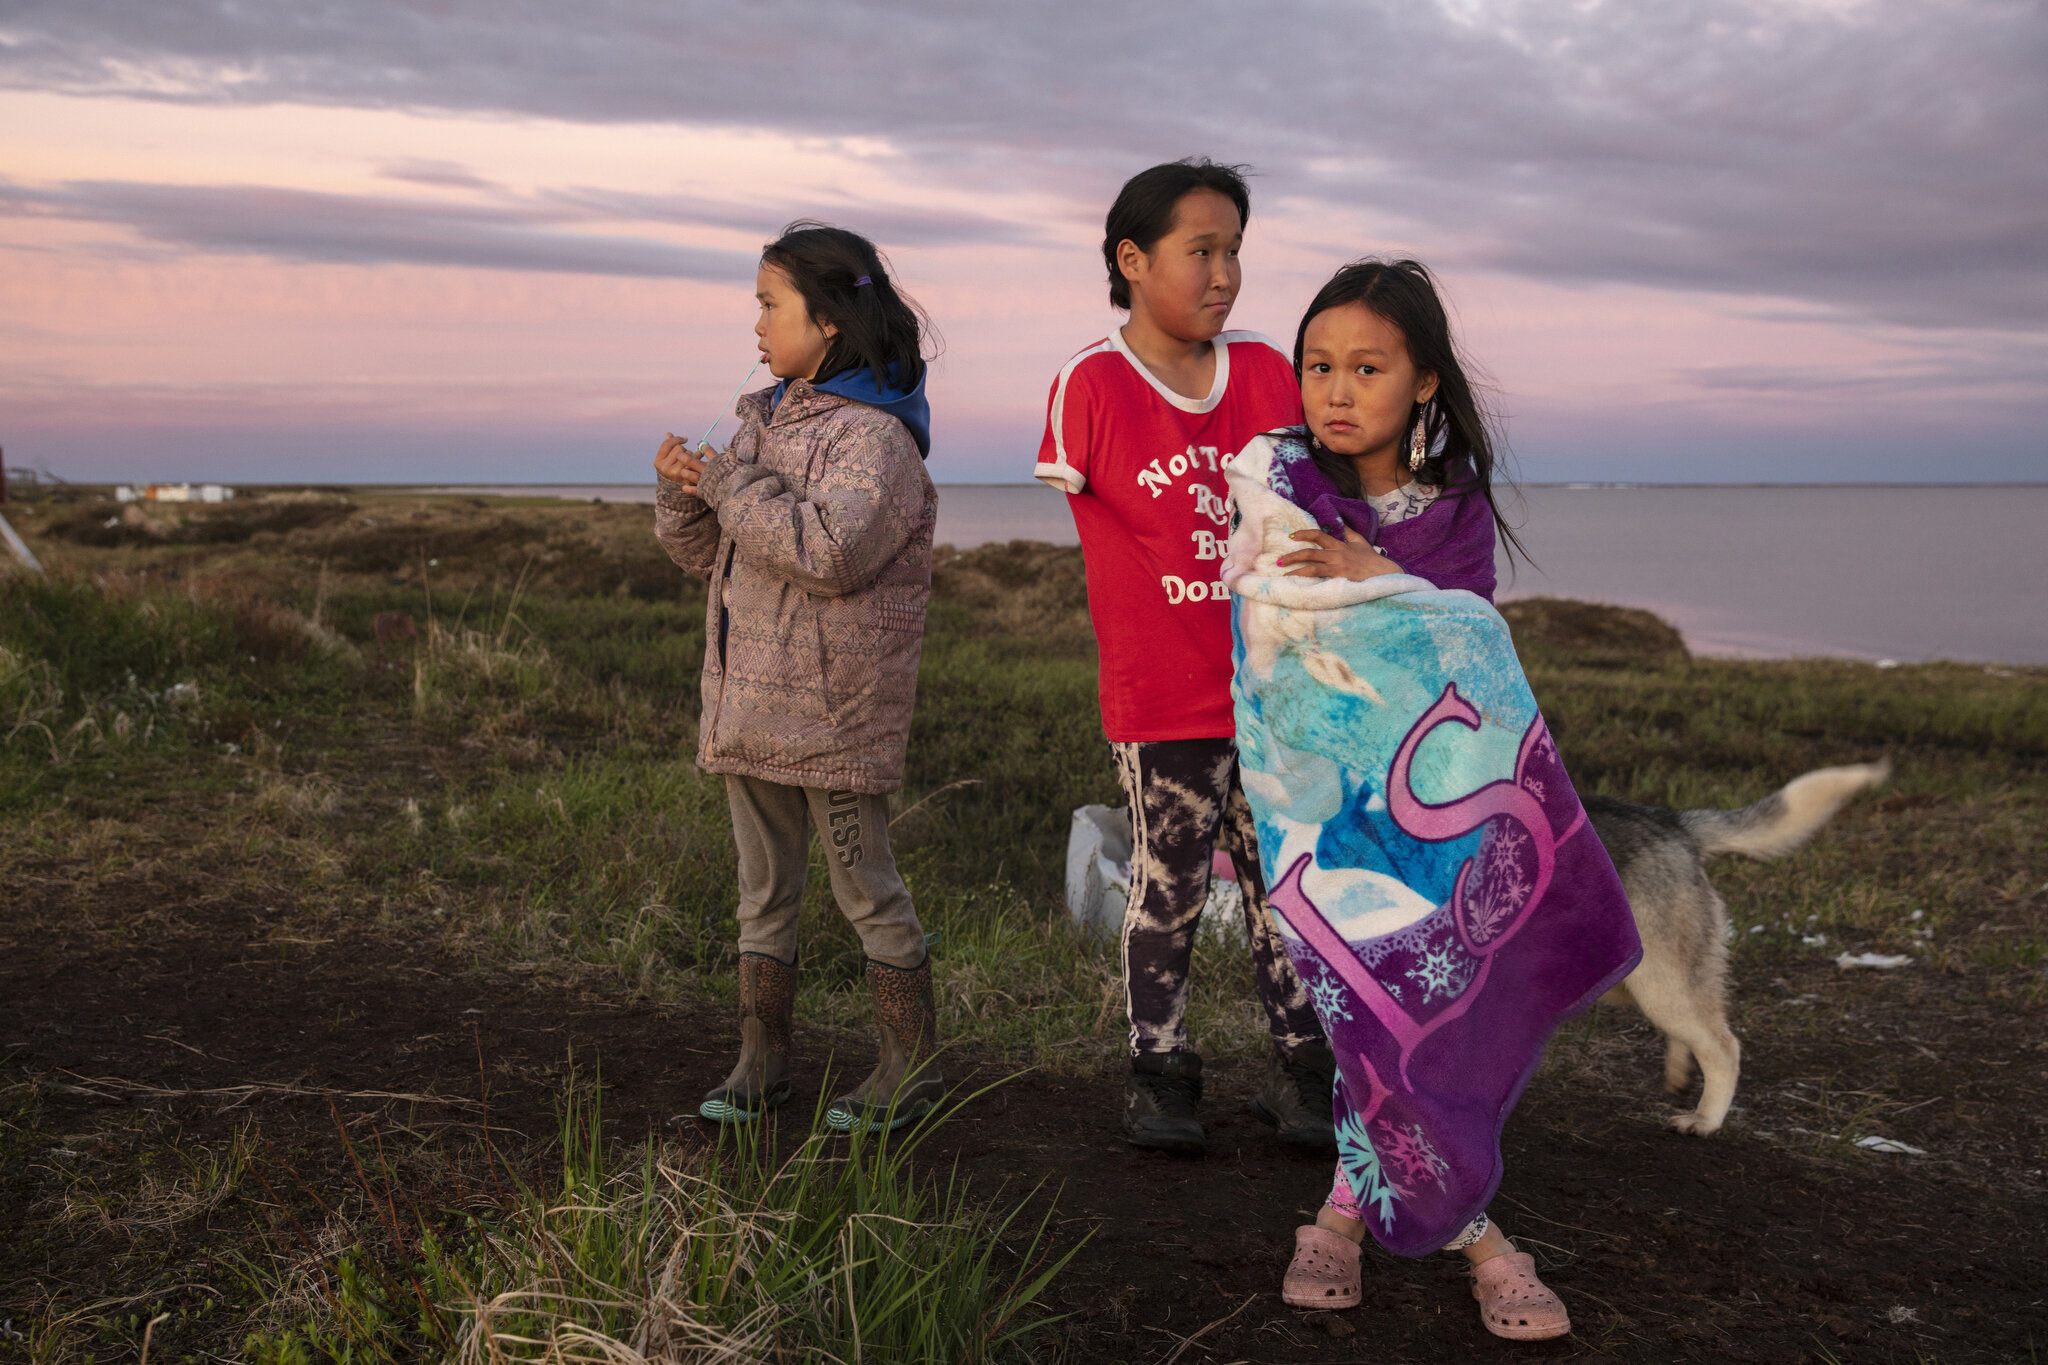  Children in Newtok, Alaska, play near crumbling permafrost cliffs that are now within a few dozen feet of numerous homes.  May 31st, 2019.The Yupik village of Newtok, Alaska, population 380, is sinking as the permafrost beneath it thaws and the coas